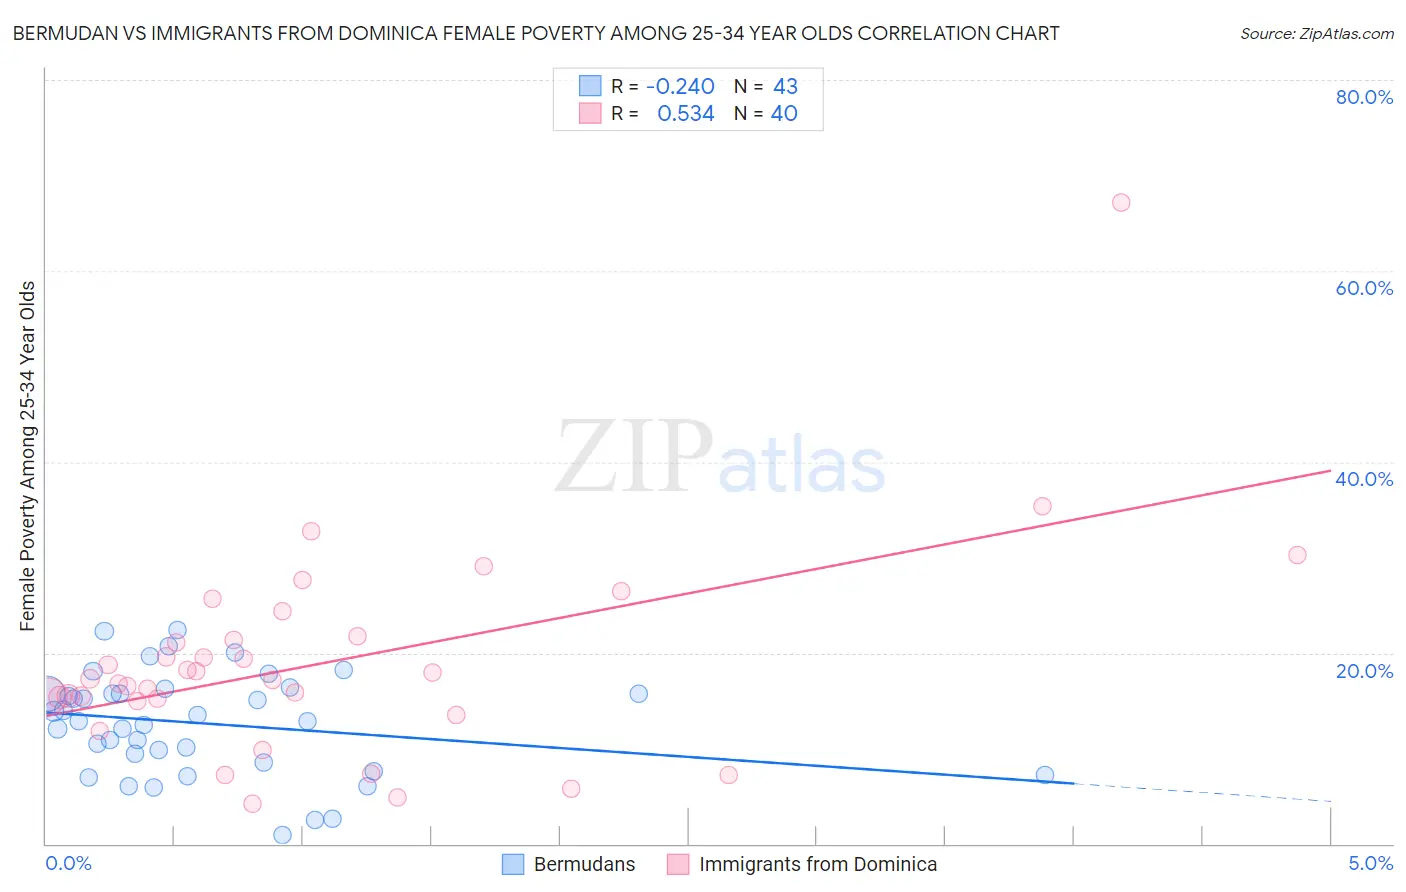 Bermudan vs Immigrants from Dominica Female Poverty Among 25-34 Year Olds